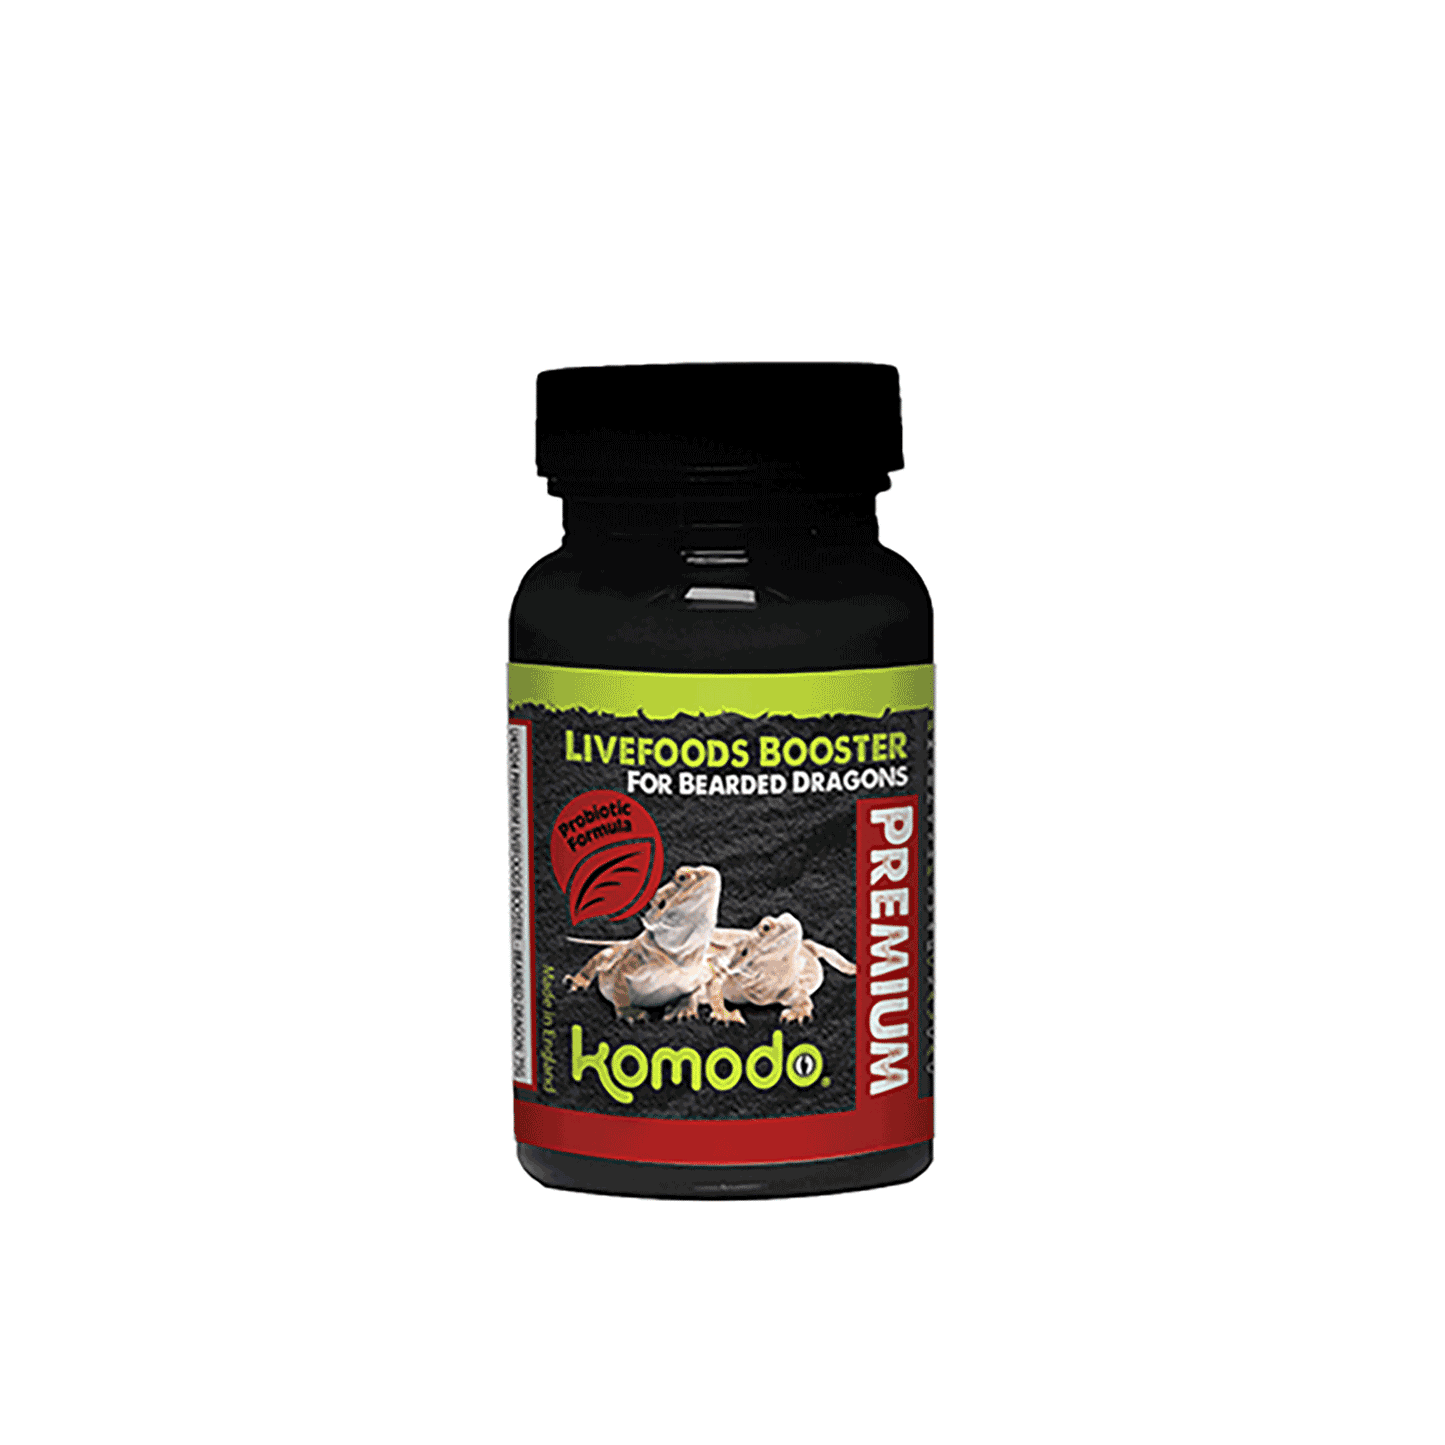 Komodo Livefoods Booster for Bearded Dragons 75g